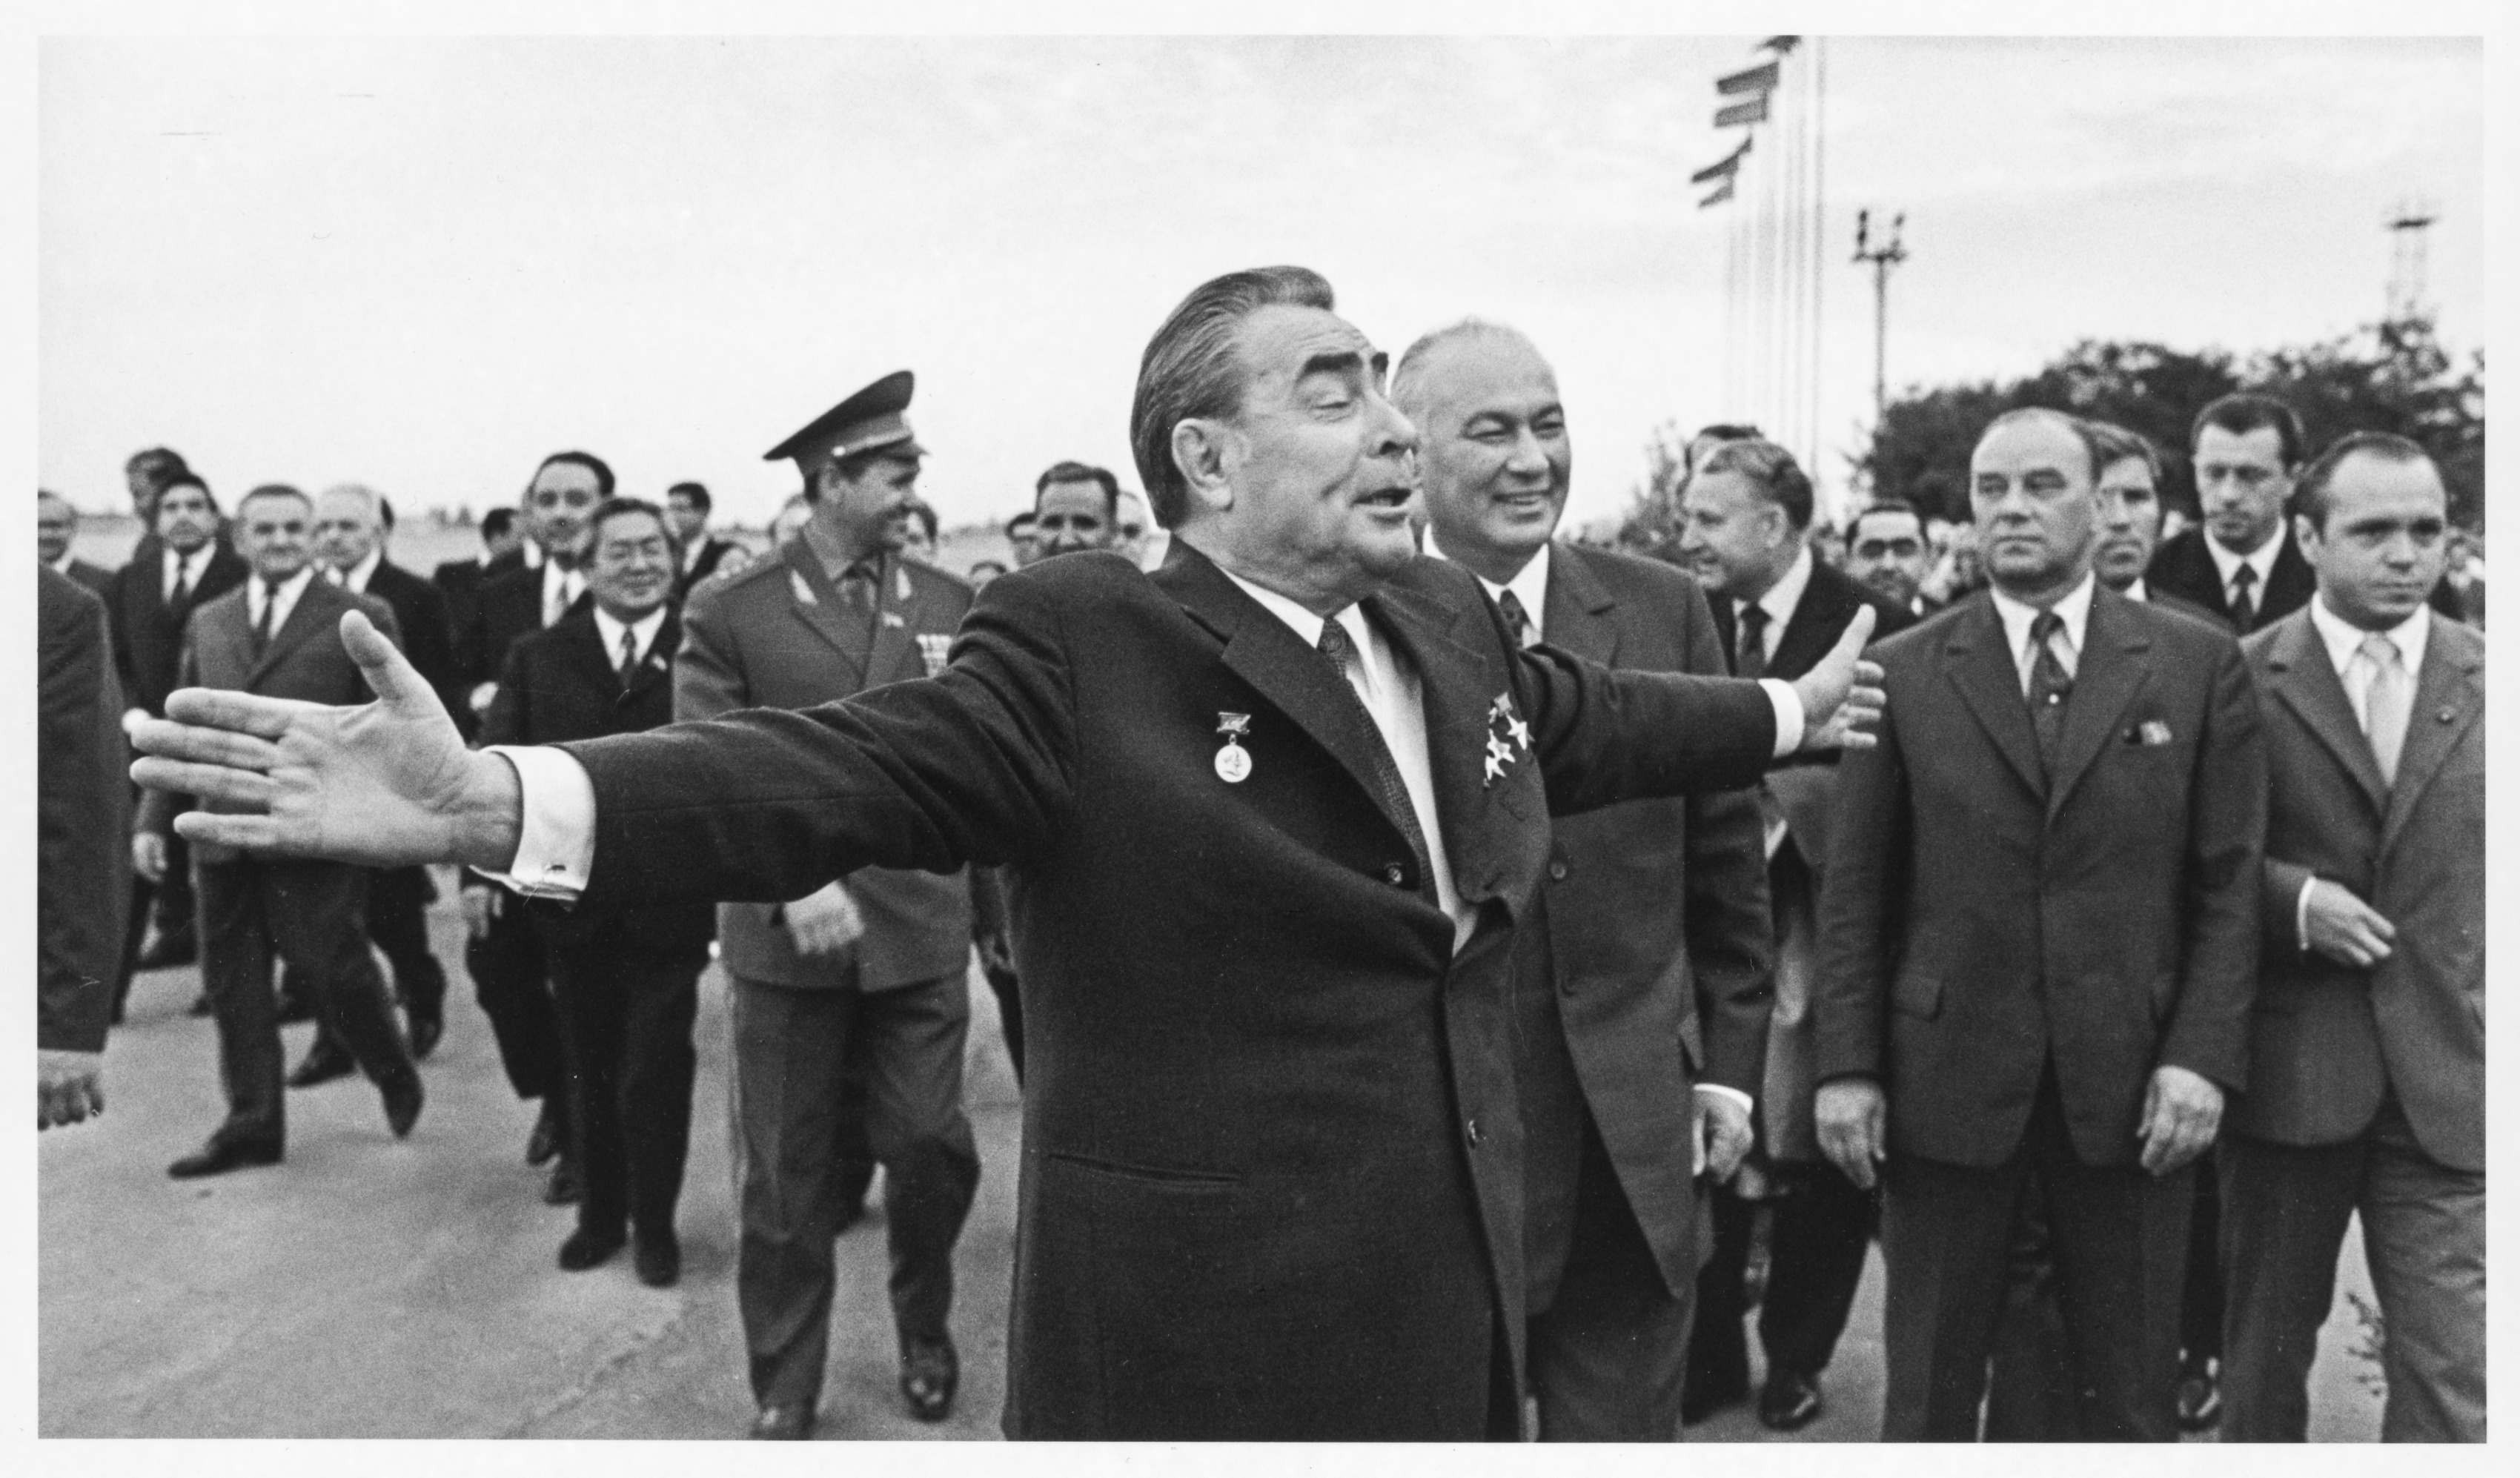 "A Wide Soul" Brezhnev greets well-wishers at the Tashkent airport, with Reashidov to his left, Uzbekistan